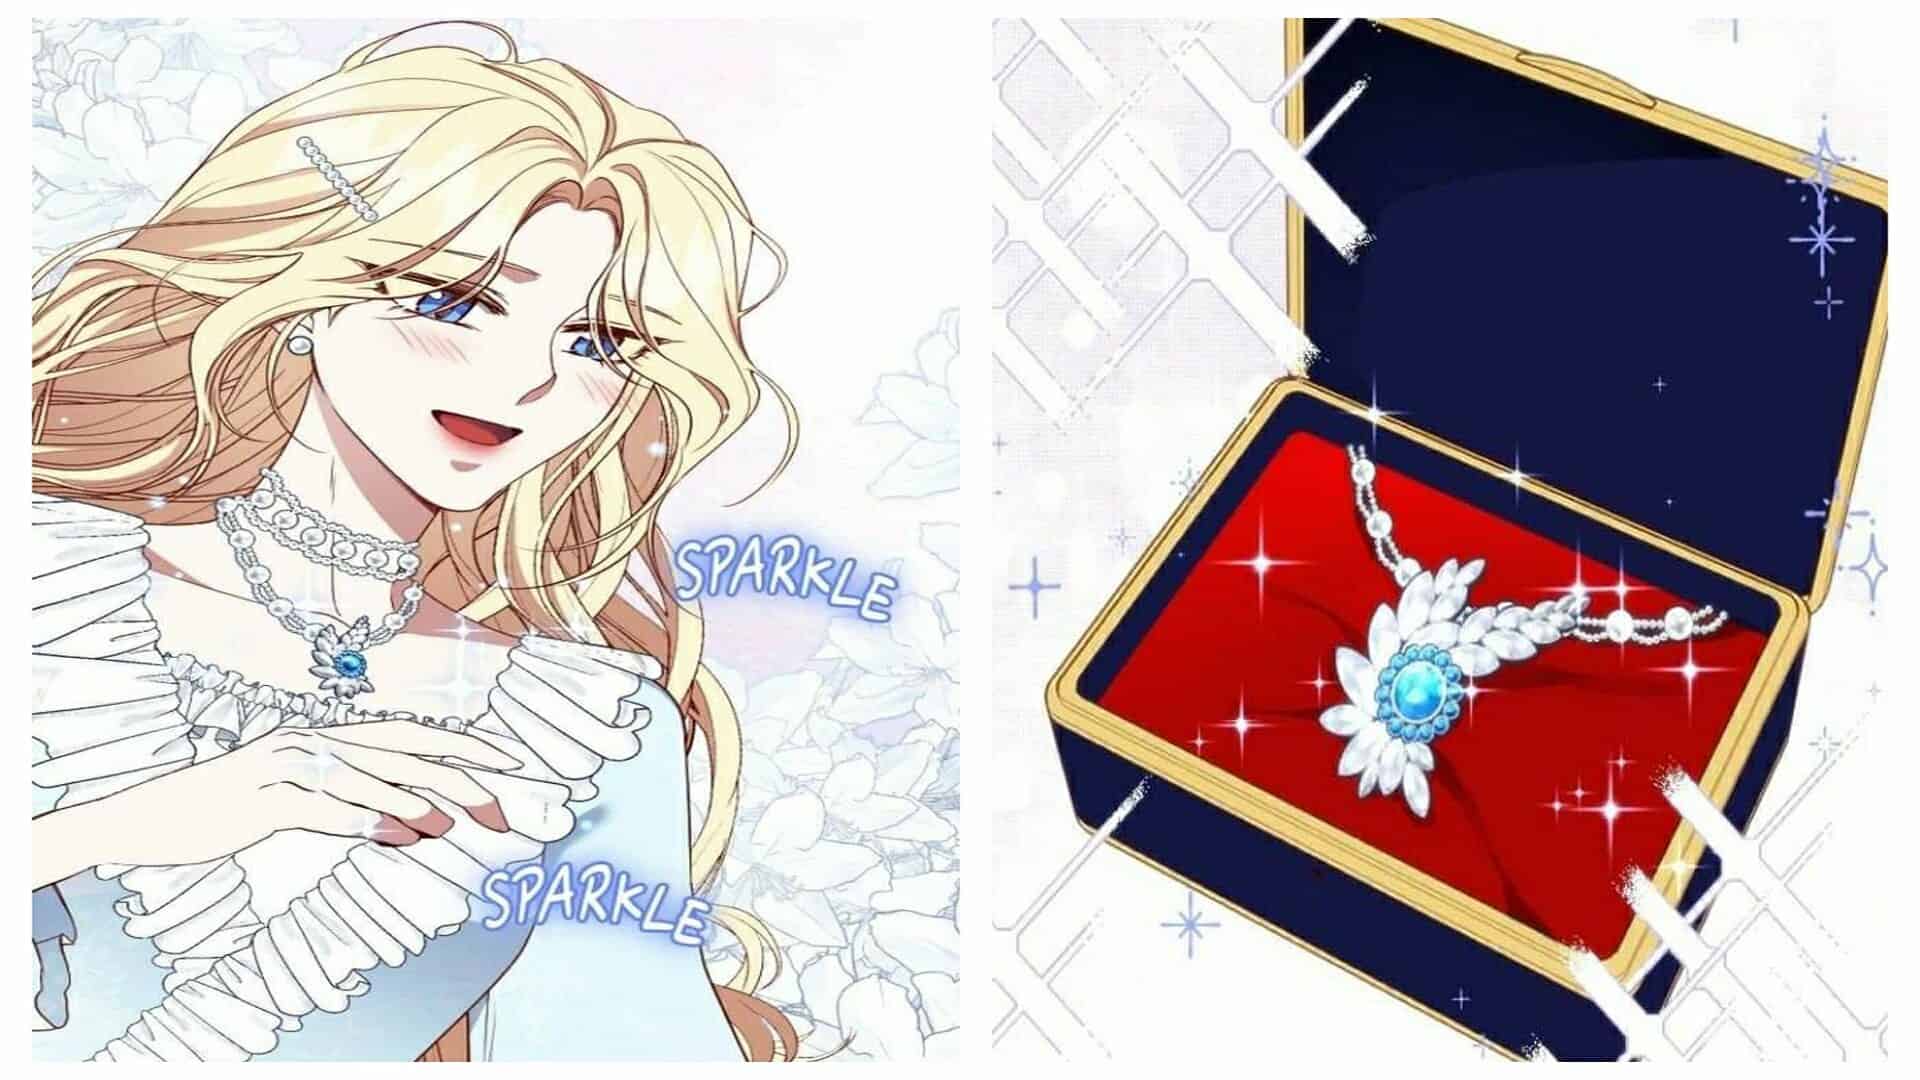 Lyla Happy After Viorst Gave Her The Necklace He Received The Day Before At The Ball - Beast’s Flower Chapter 26 (Credits: Tappytoon)